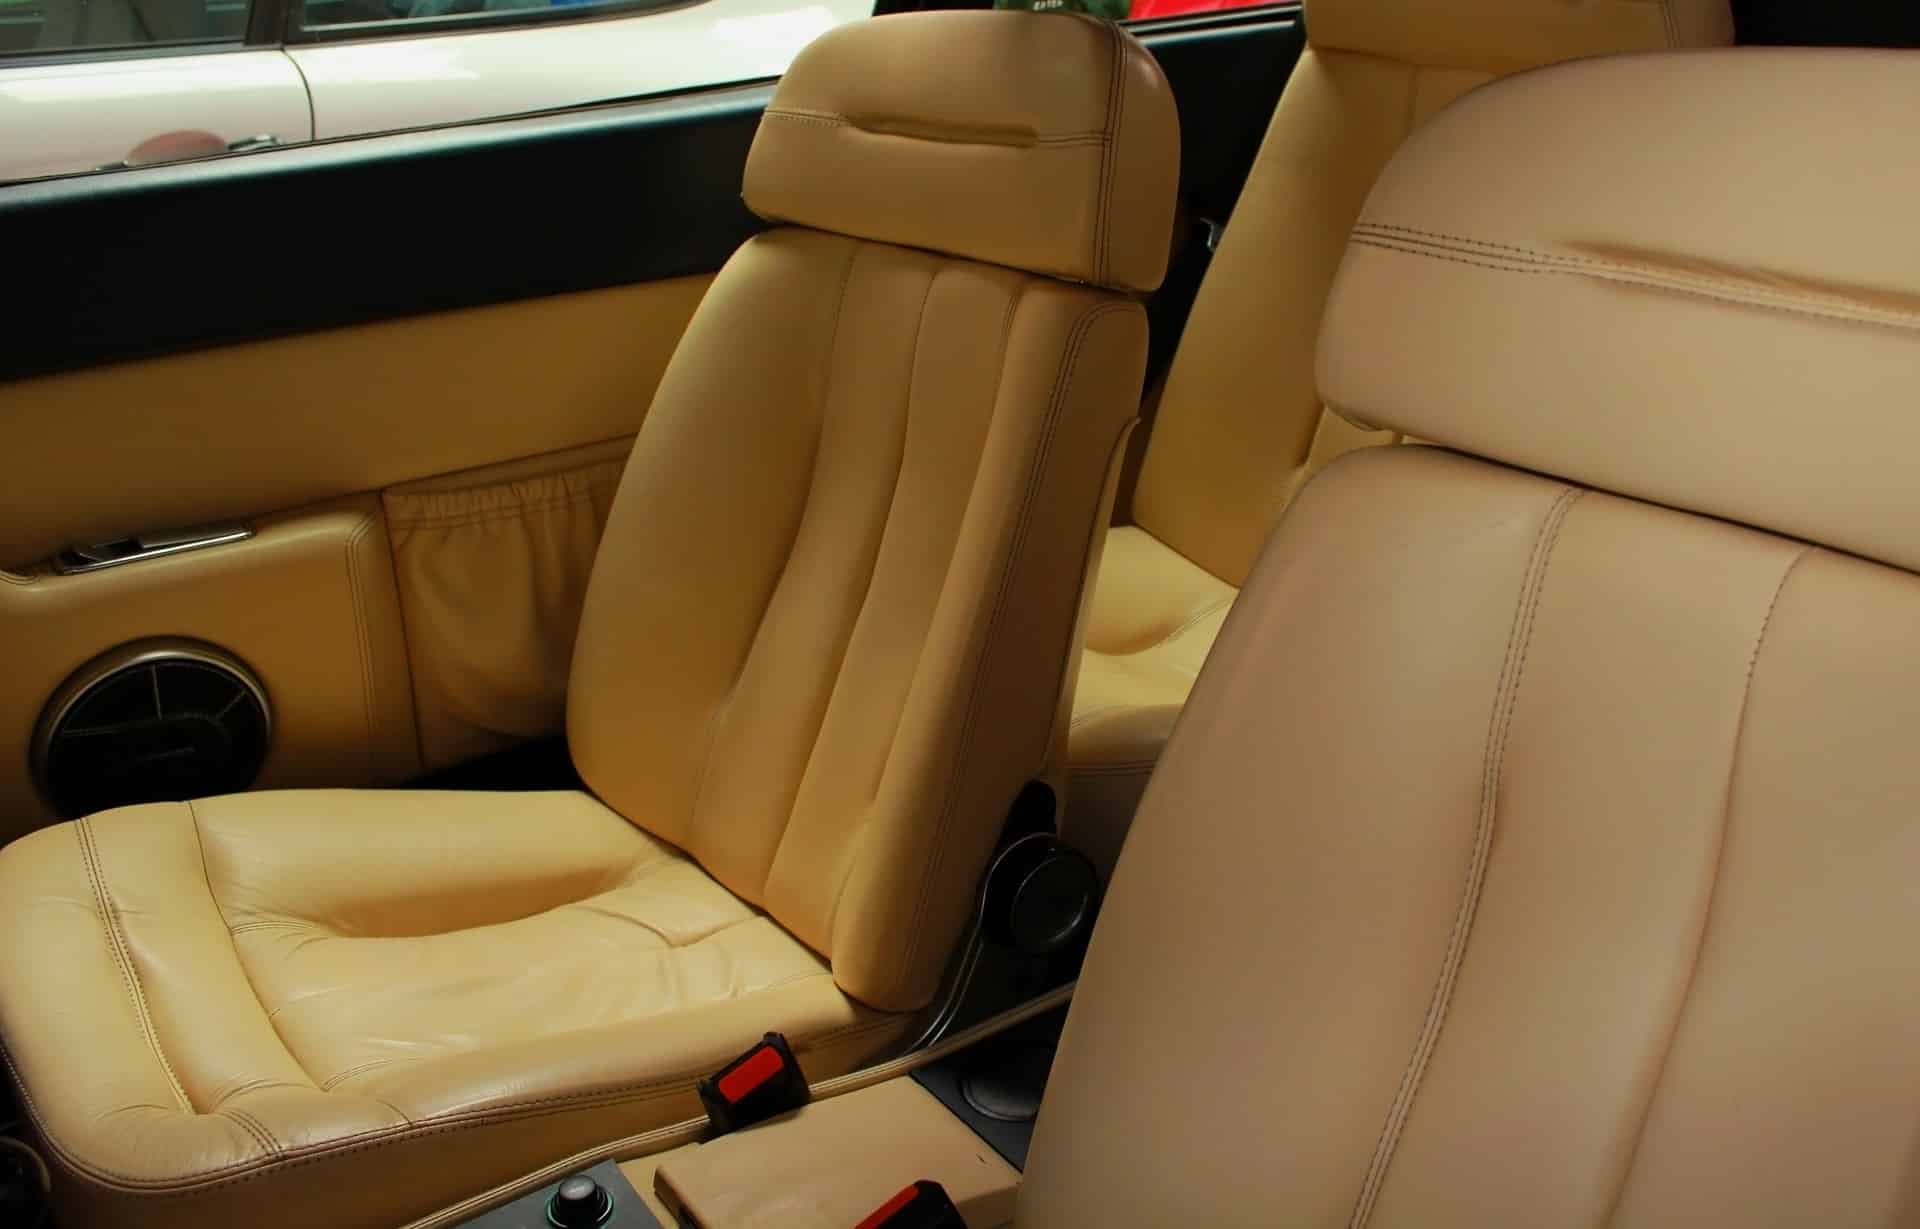 Spring Clean Your Car's Interior